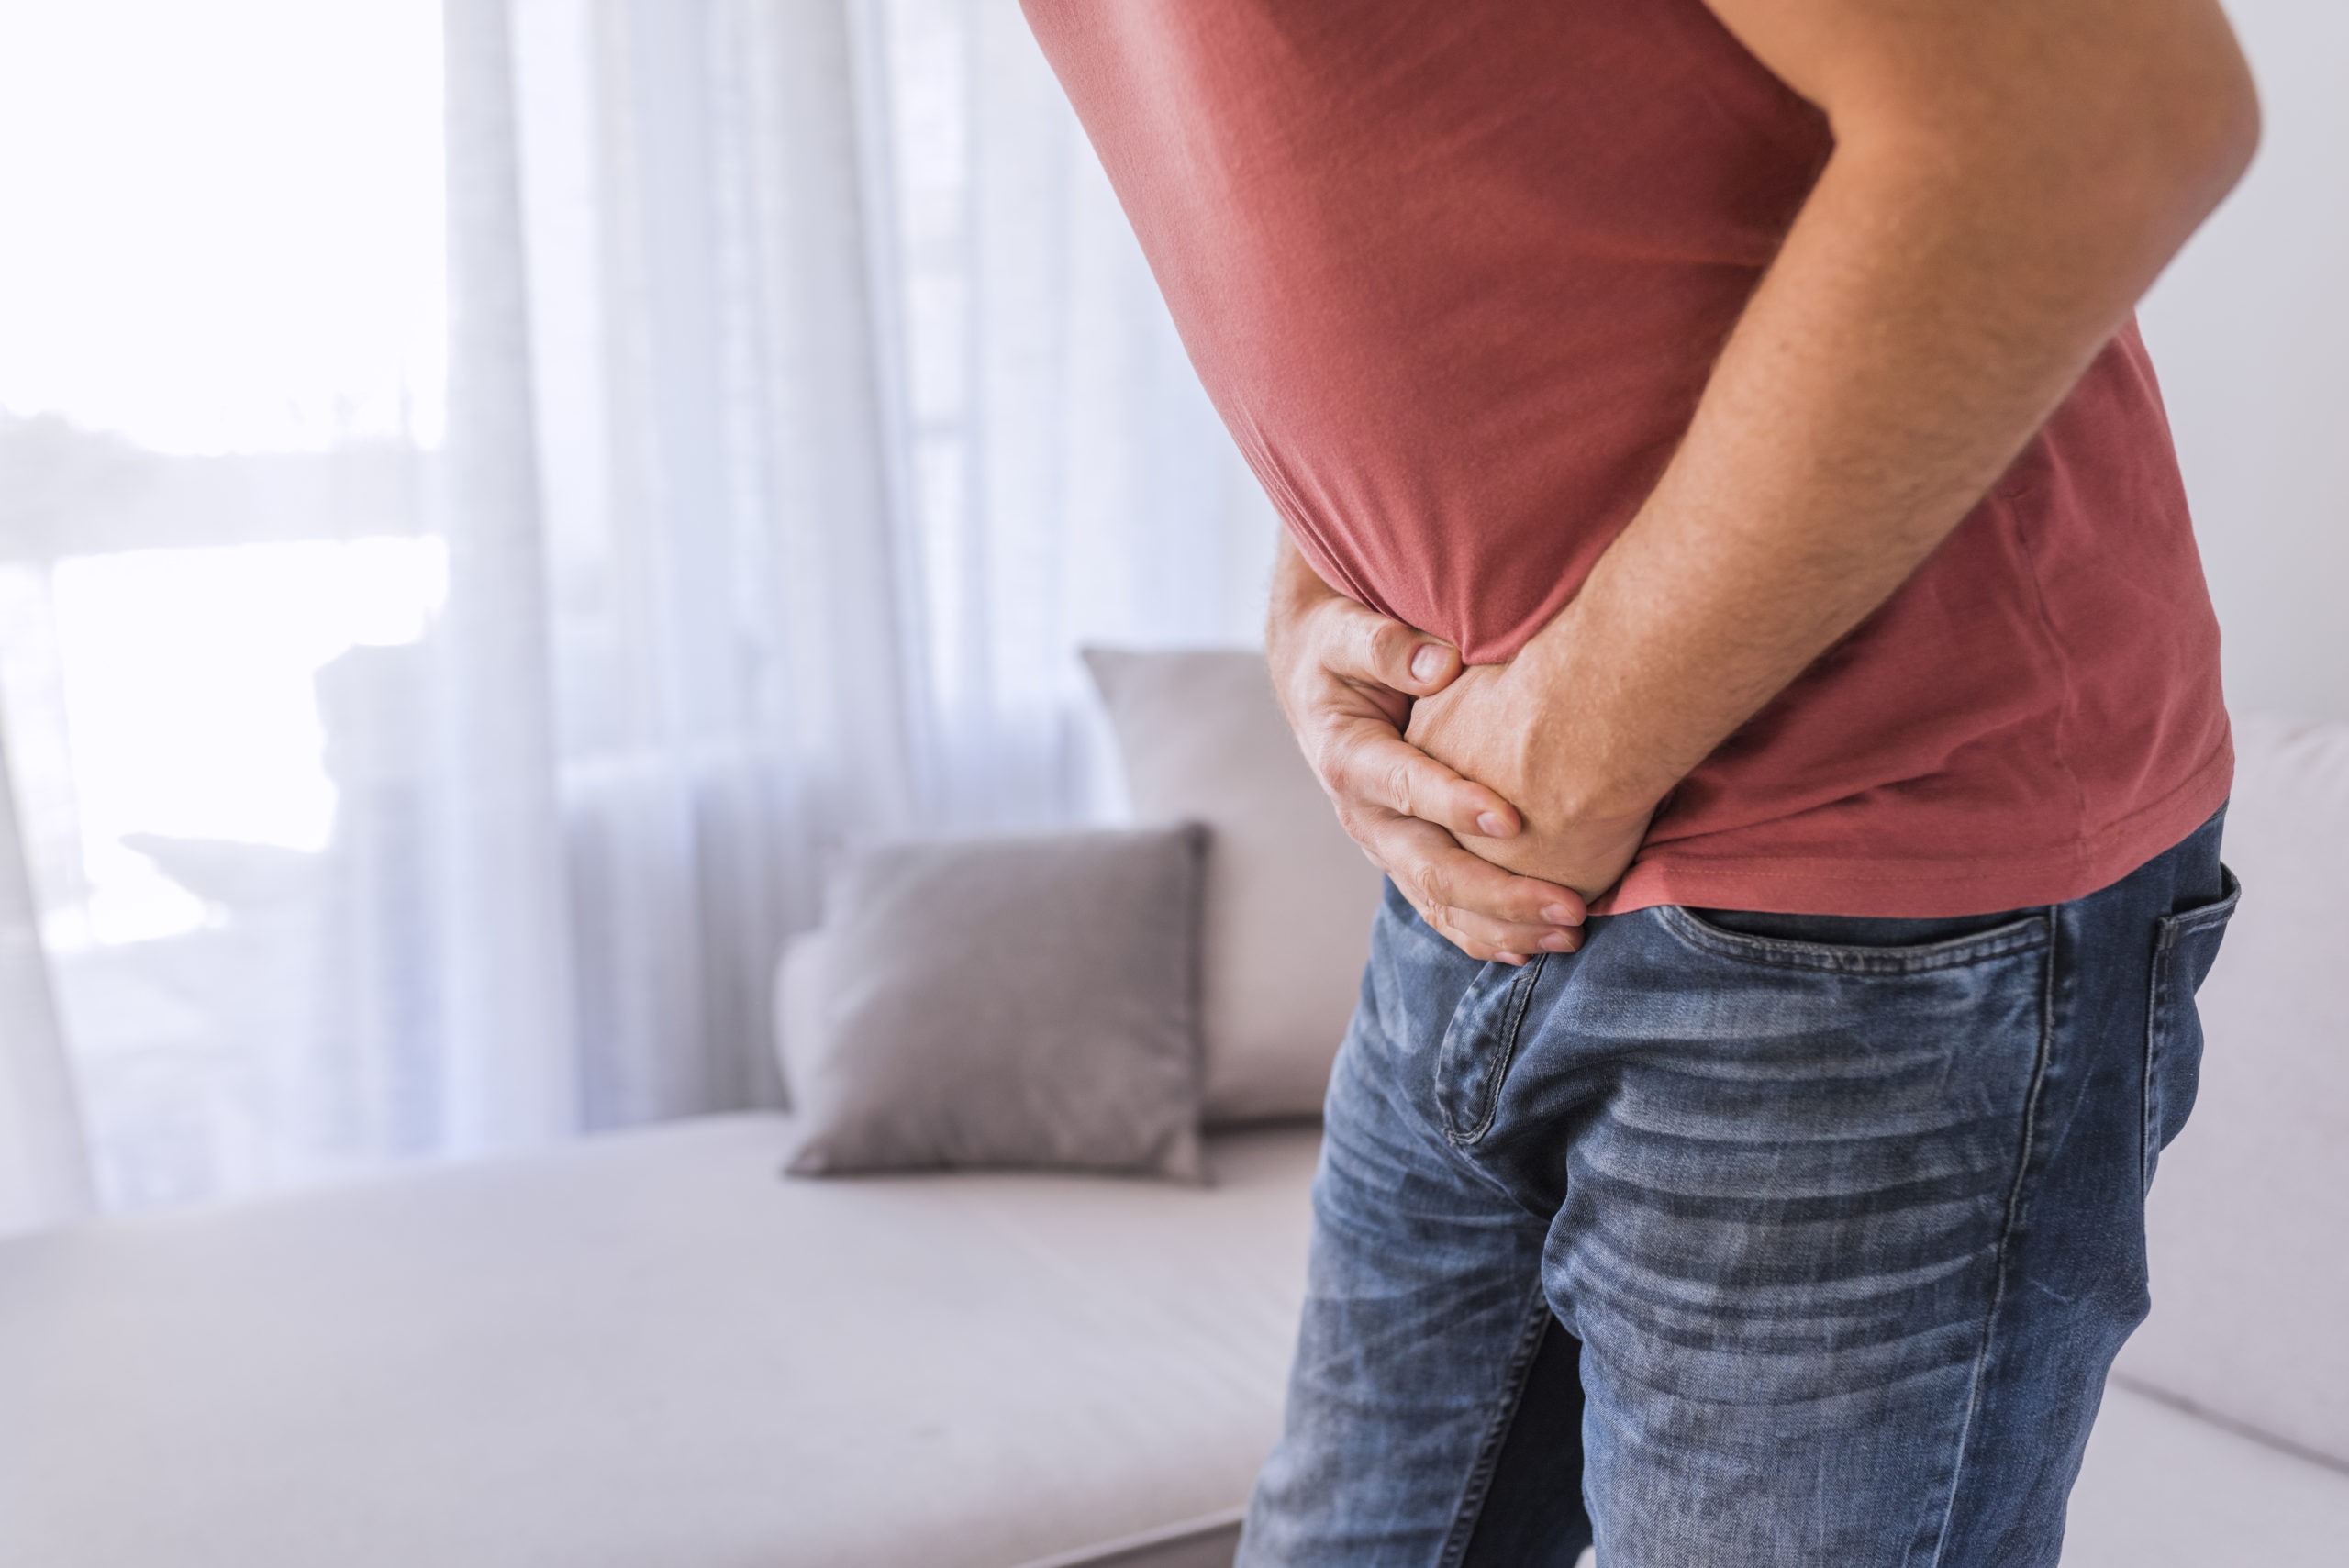 Male Pelvic Pain and Pelvic Floor Physical Therapy - Urology Austin